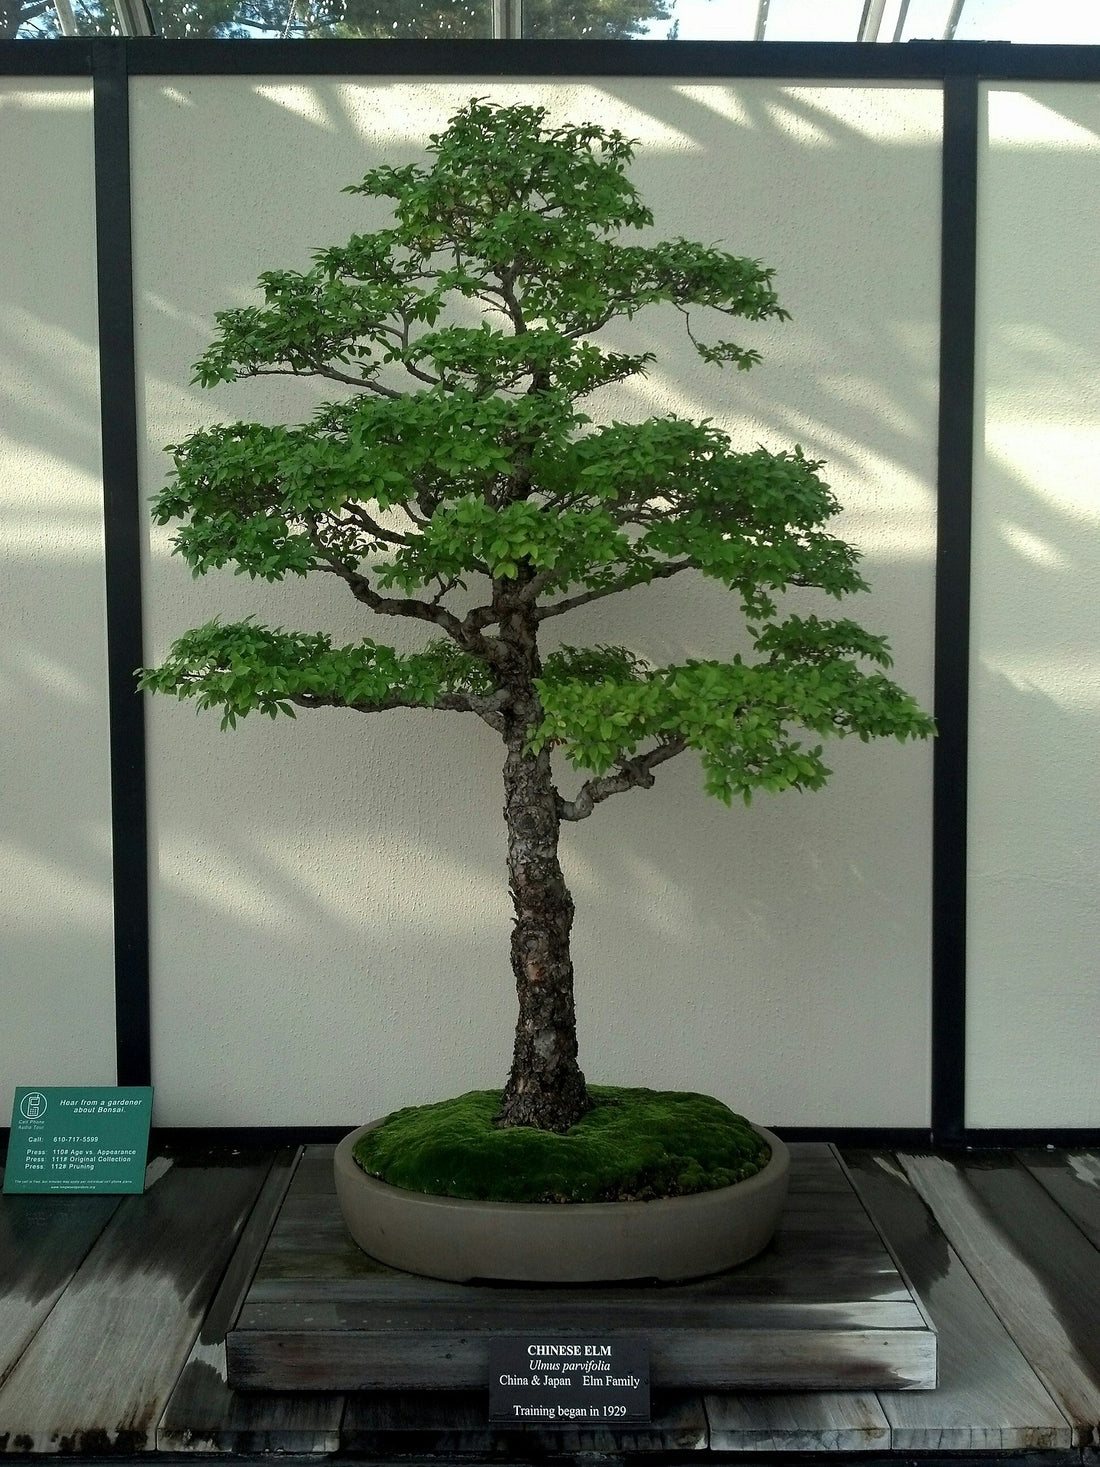 Tall Bonsai tree in a container